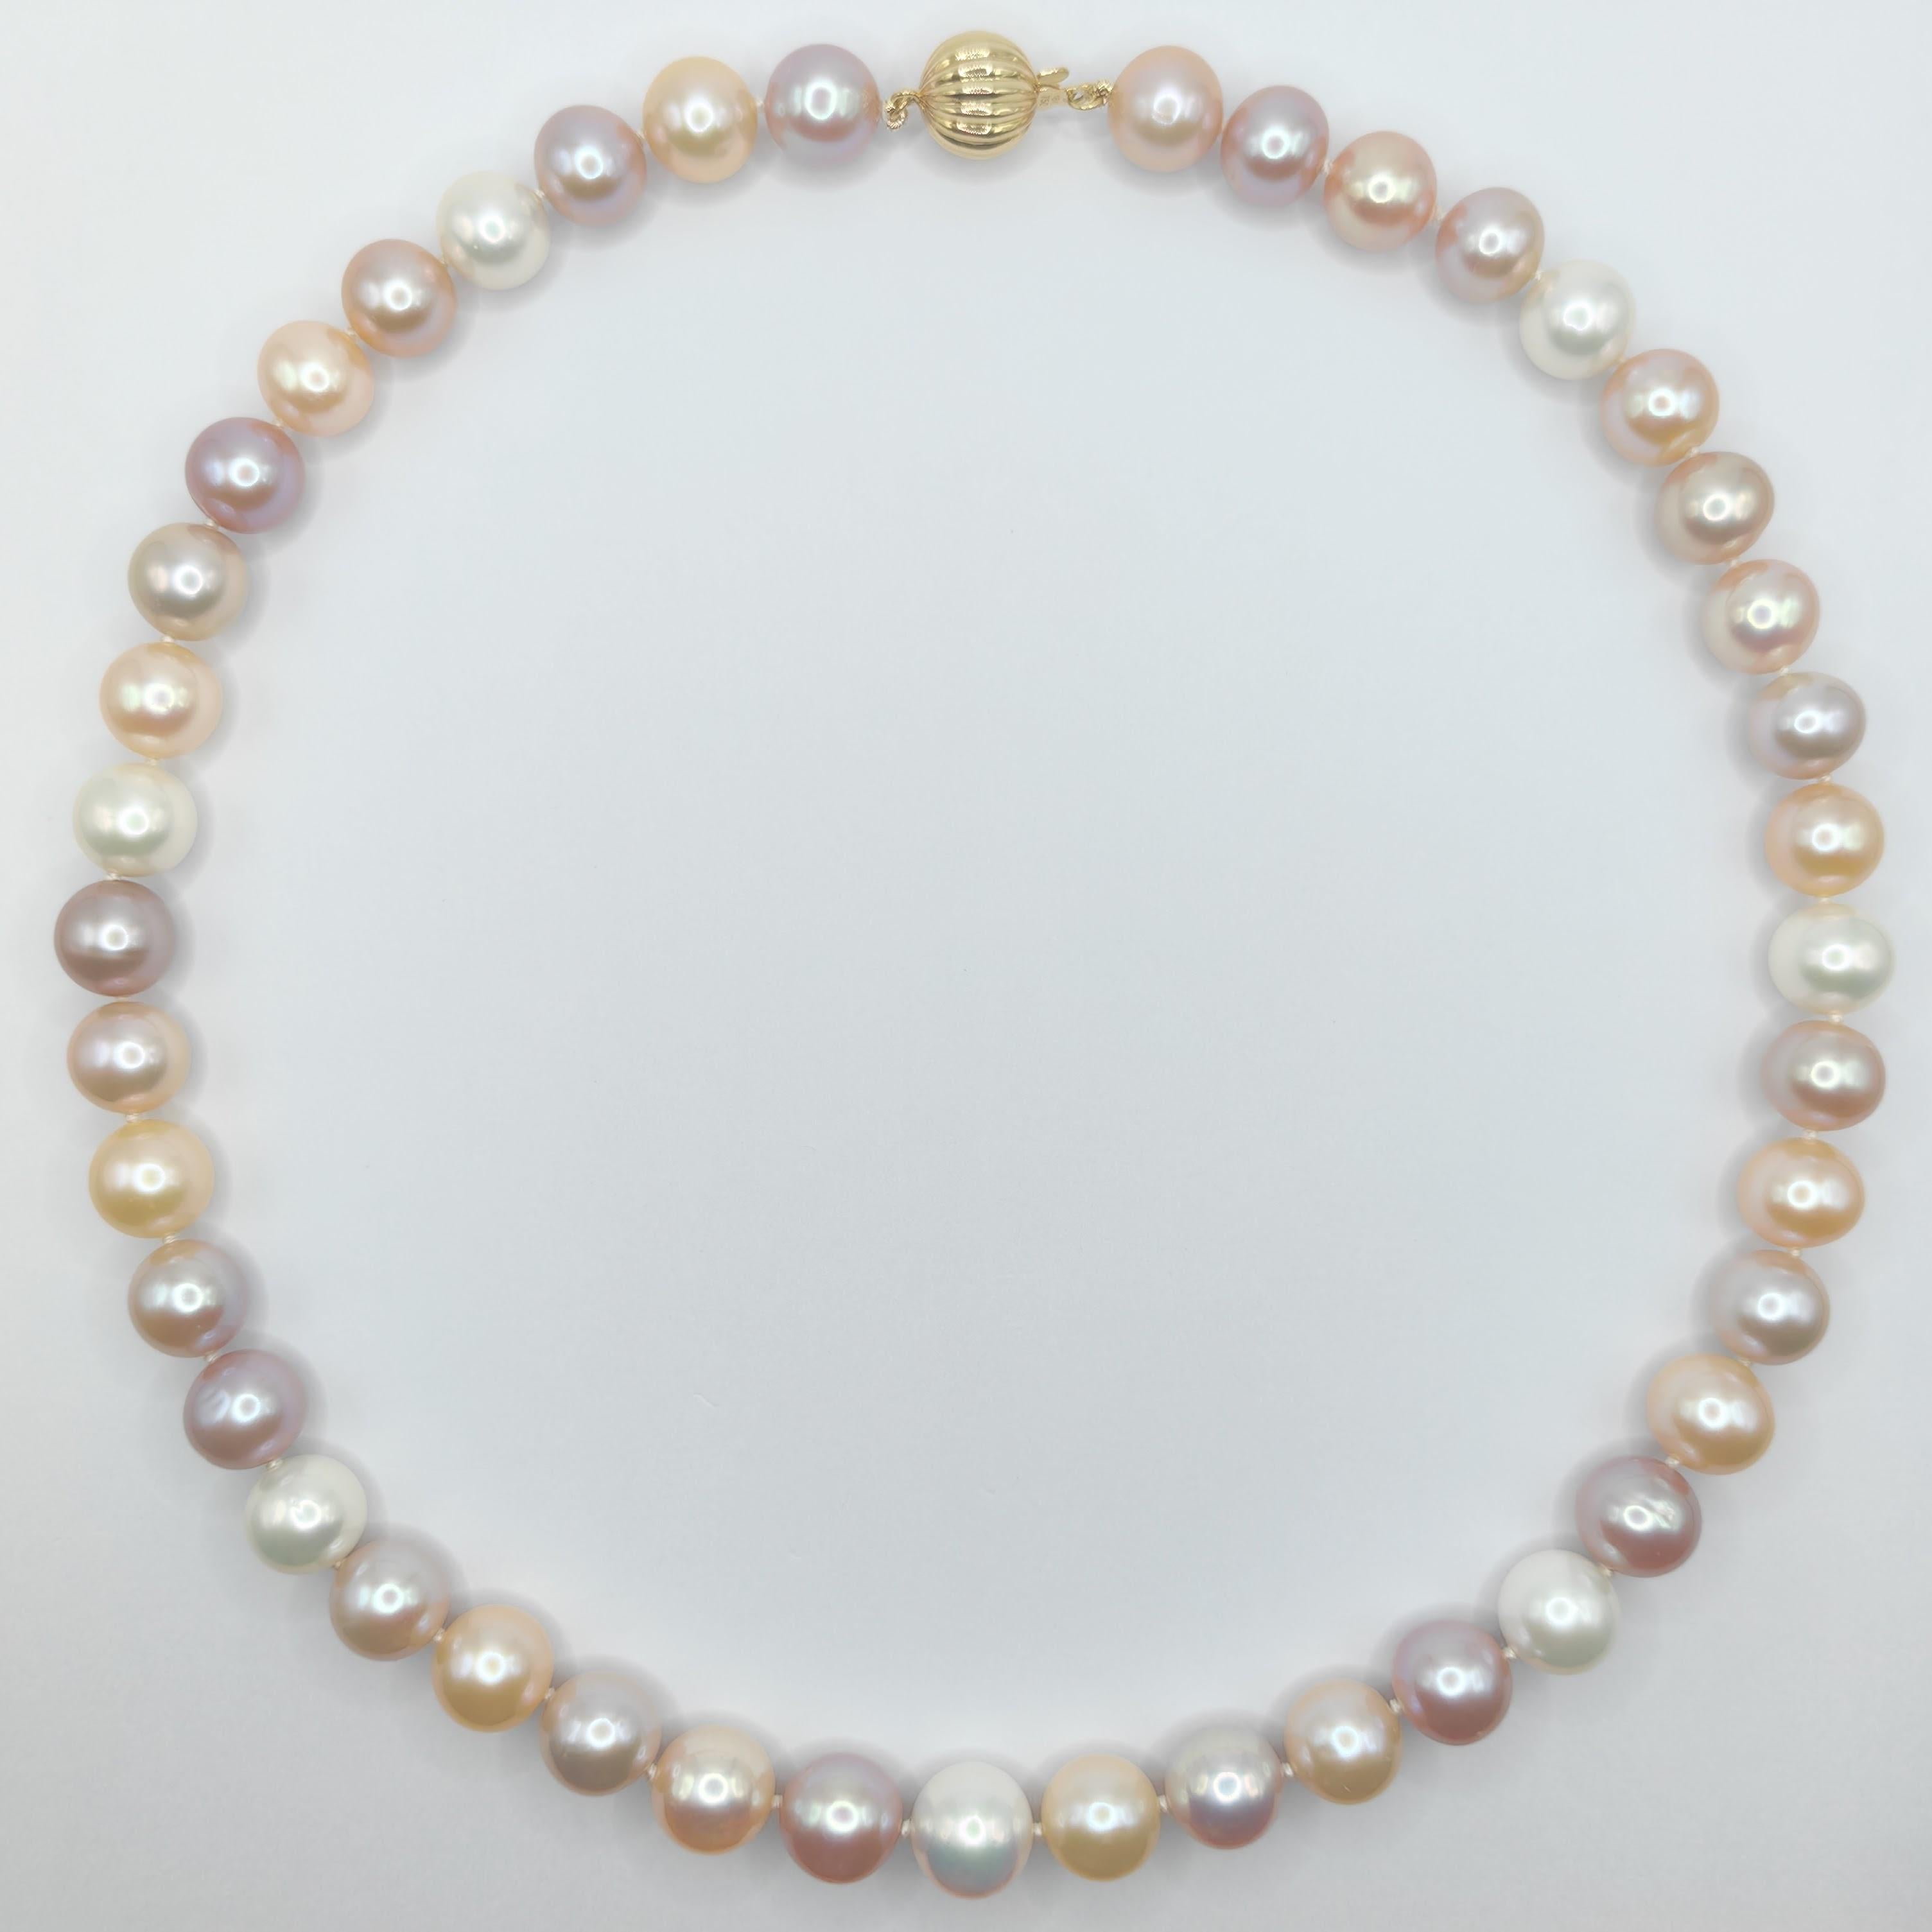 Introducing our 18-inch 9-10mm Multi-color Pink Peach White Round Pearl Necklace, a beautifully hand-knotted accessory that adds a touch of sophistication and style to both men's and women's wardrobes. These candy-colored pearls, with their